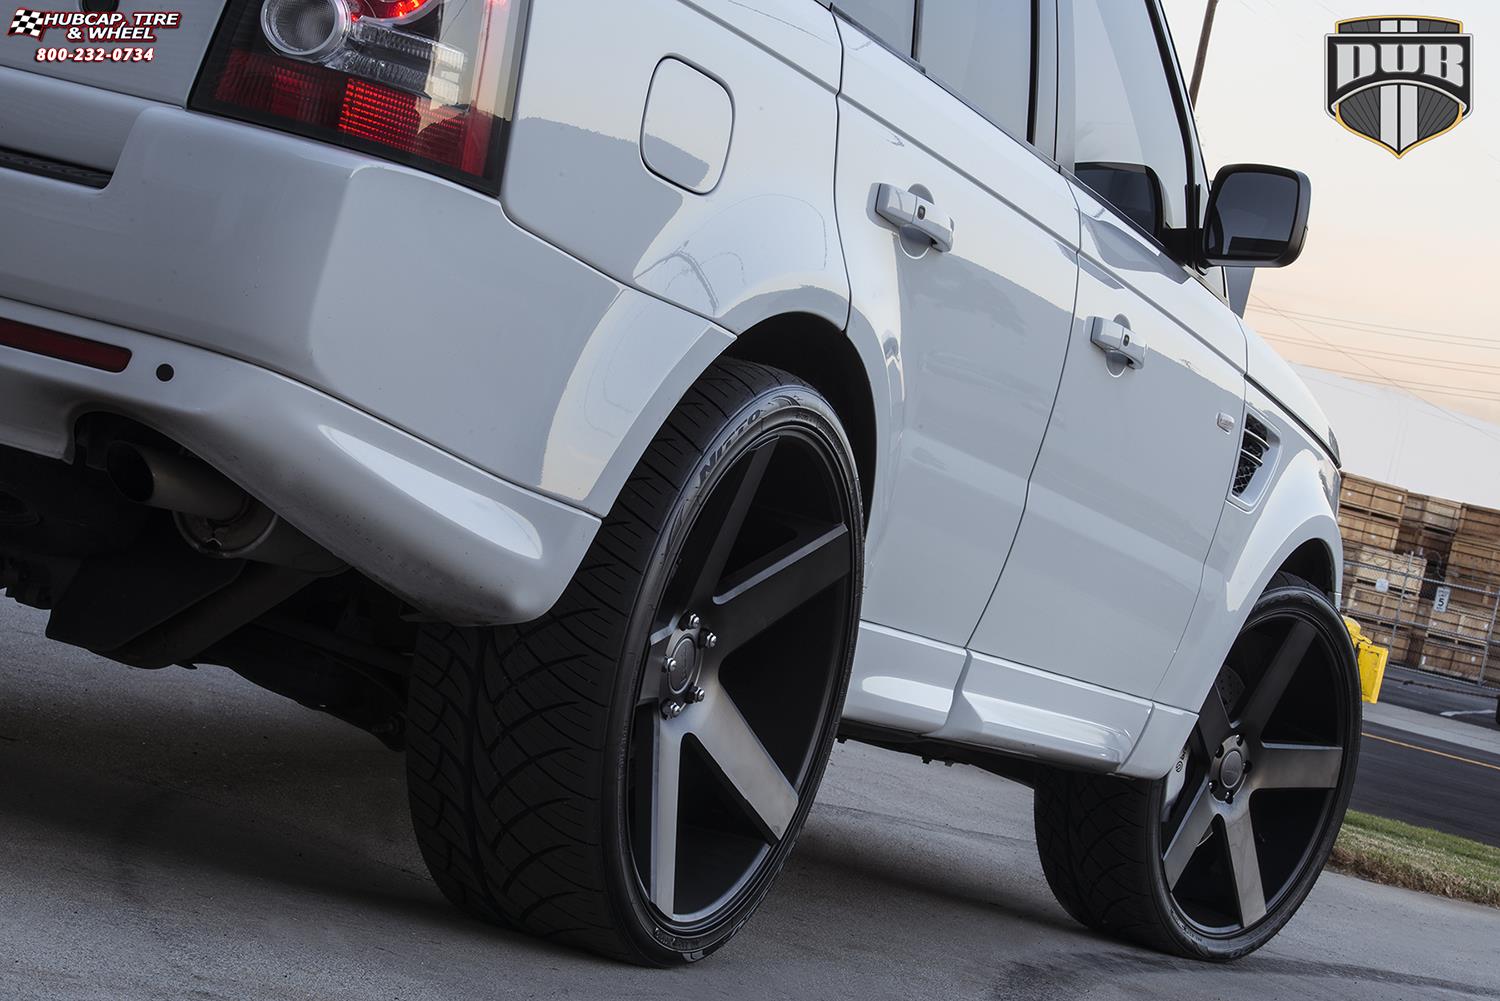 vehicle gallery/land rover range rover sport dub baller s116 24X9  Black & Machined with Dark Tint wheels and rims